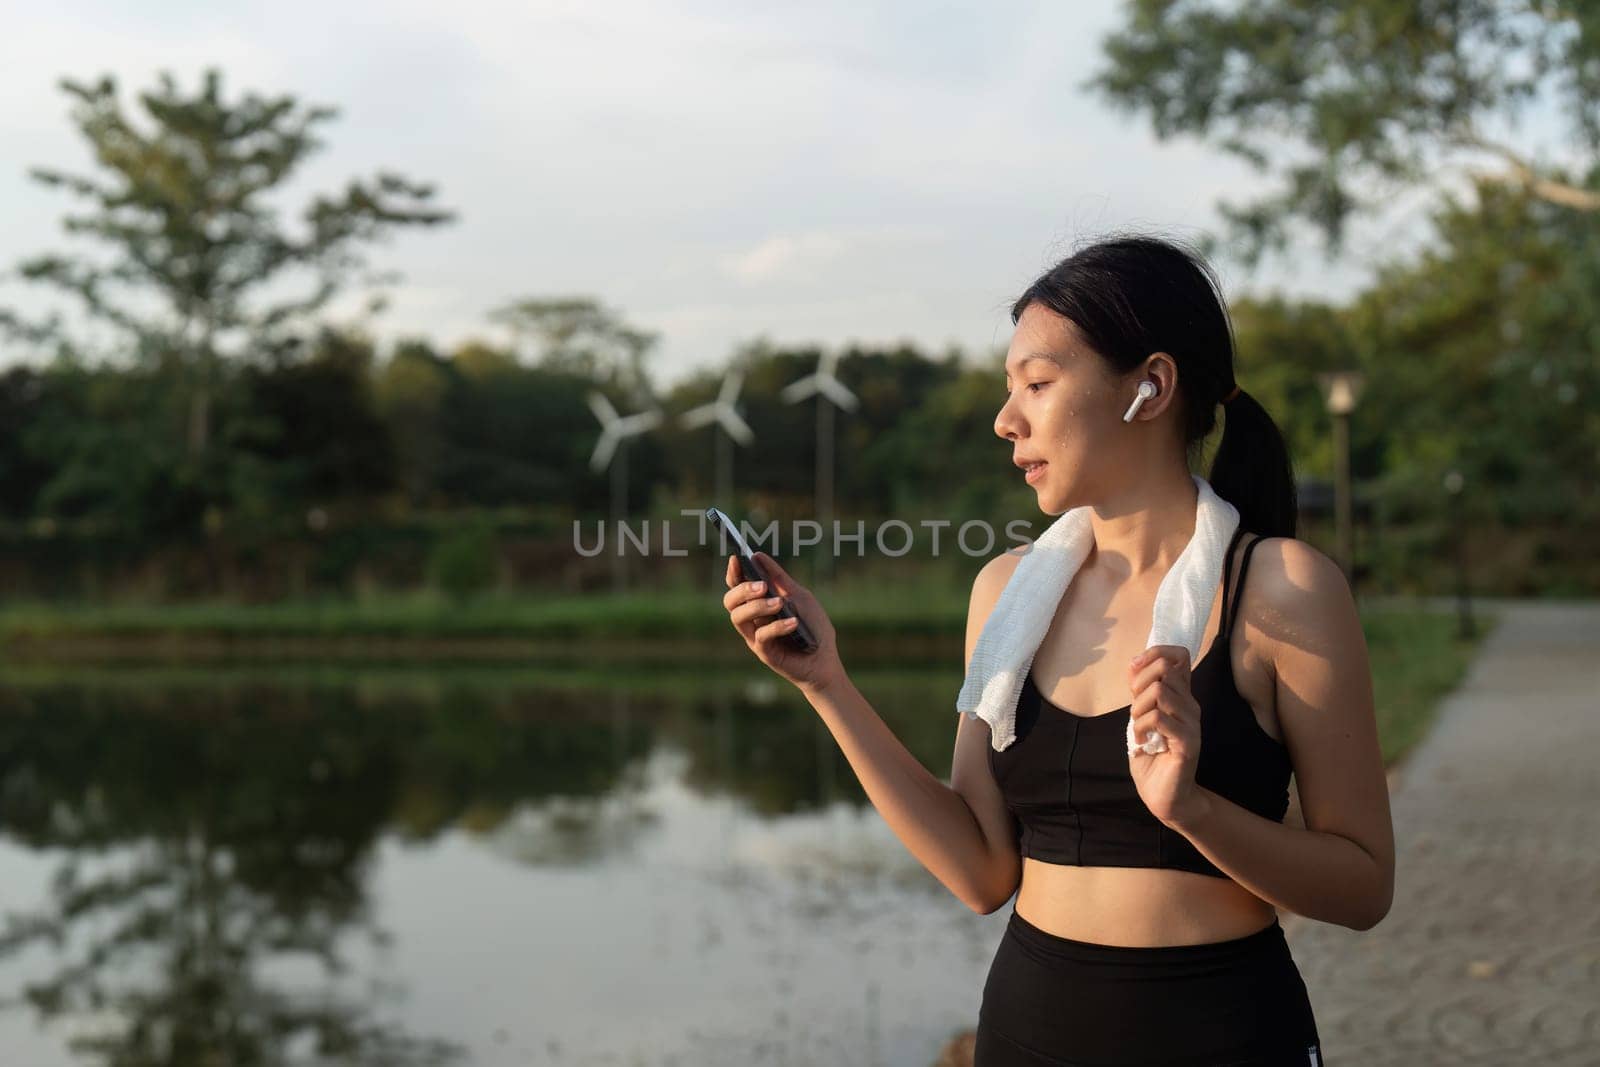 Women use mobile phone and wear headphones during exercise. Workout concept by itchaznong